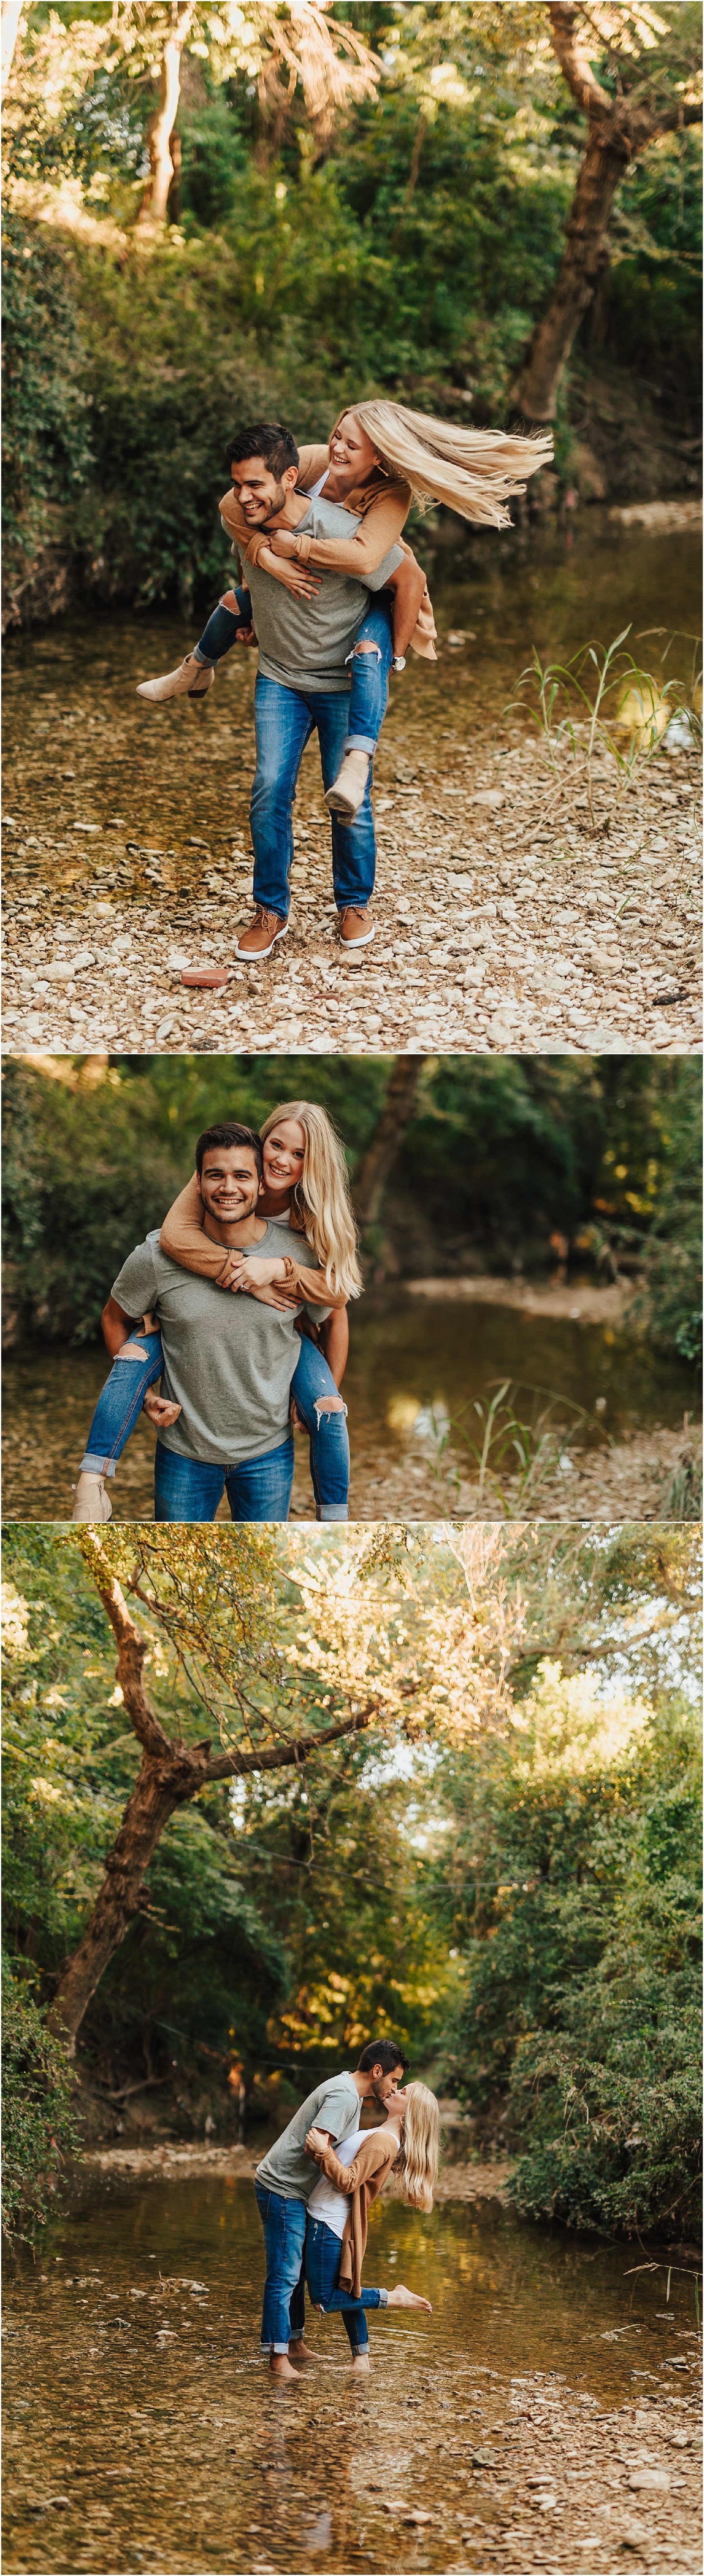 fortworth-engagement-photography